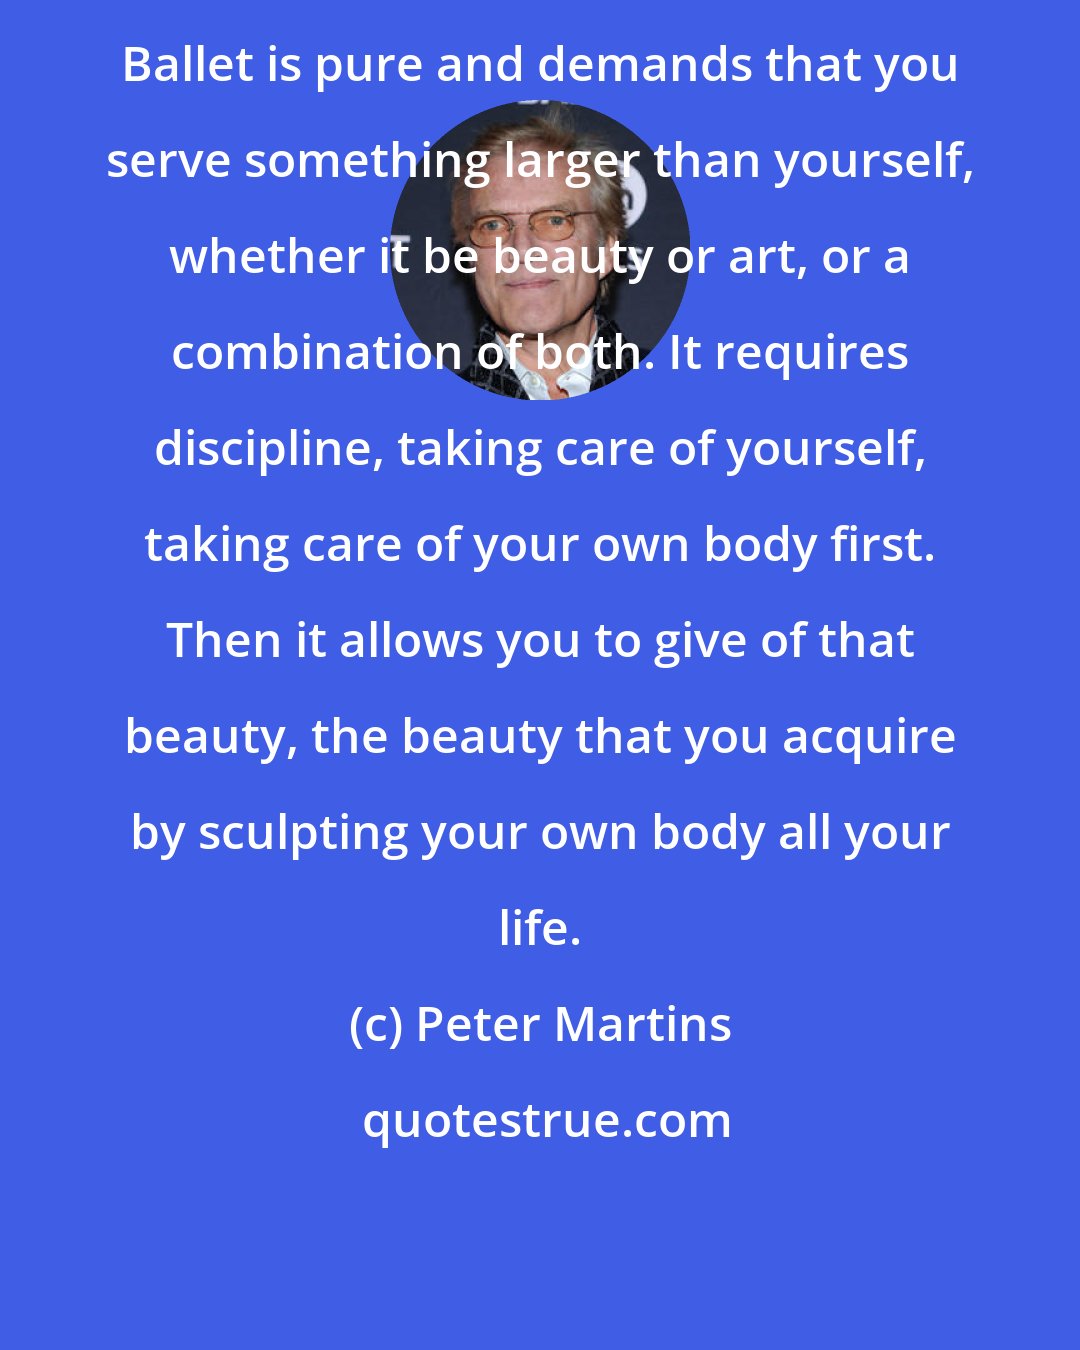 Peter Martins: Ballet is pure and demands that you serve something larger than yourself, whether it be beauty or art, or a combination of both. It requires discipline, taking care of yourself, taking care of your own body first. Then it allows you to give of that beauty, the beauty that you acquire by sculpting your own body all your life.